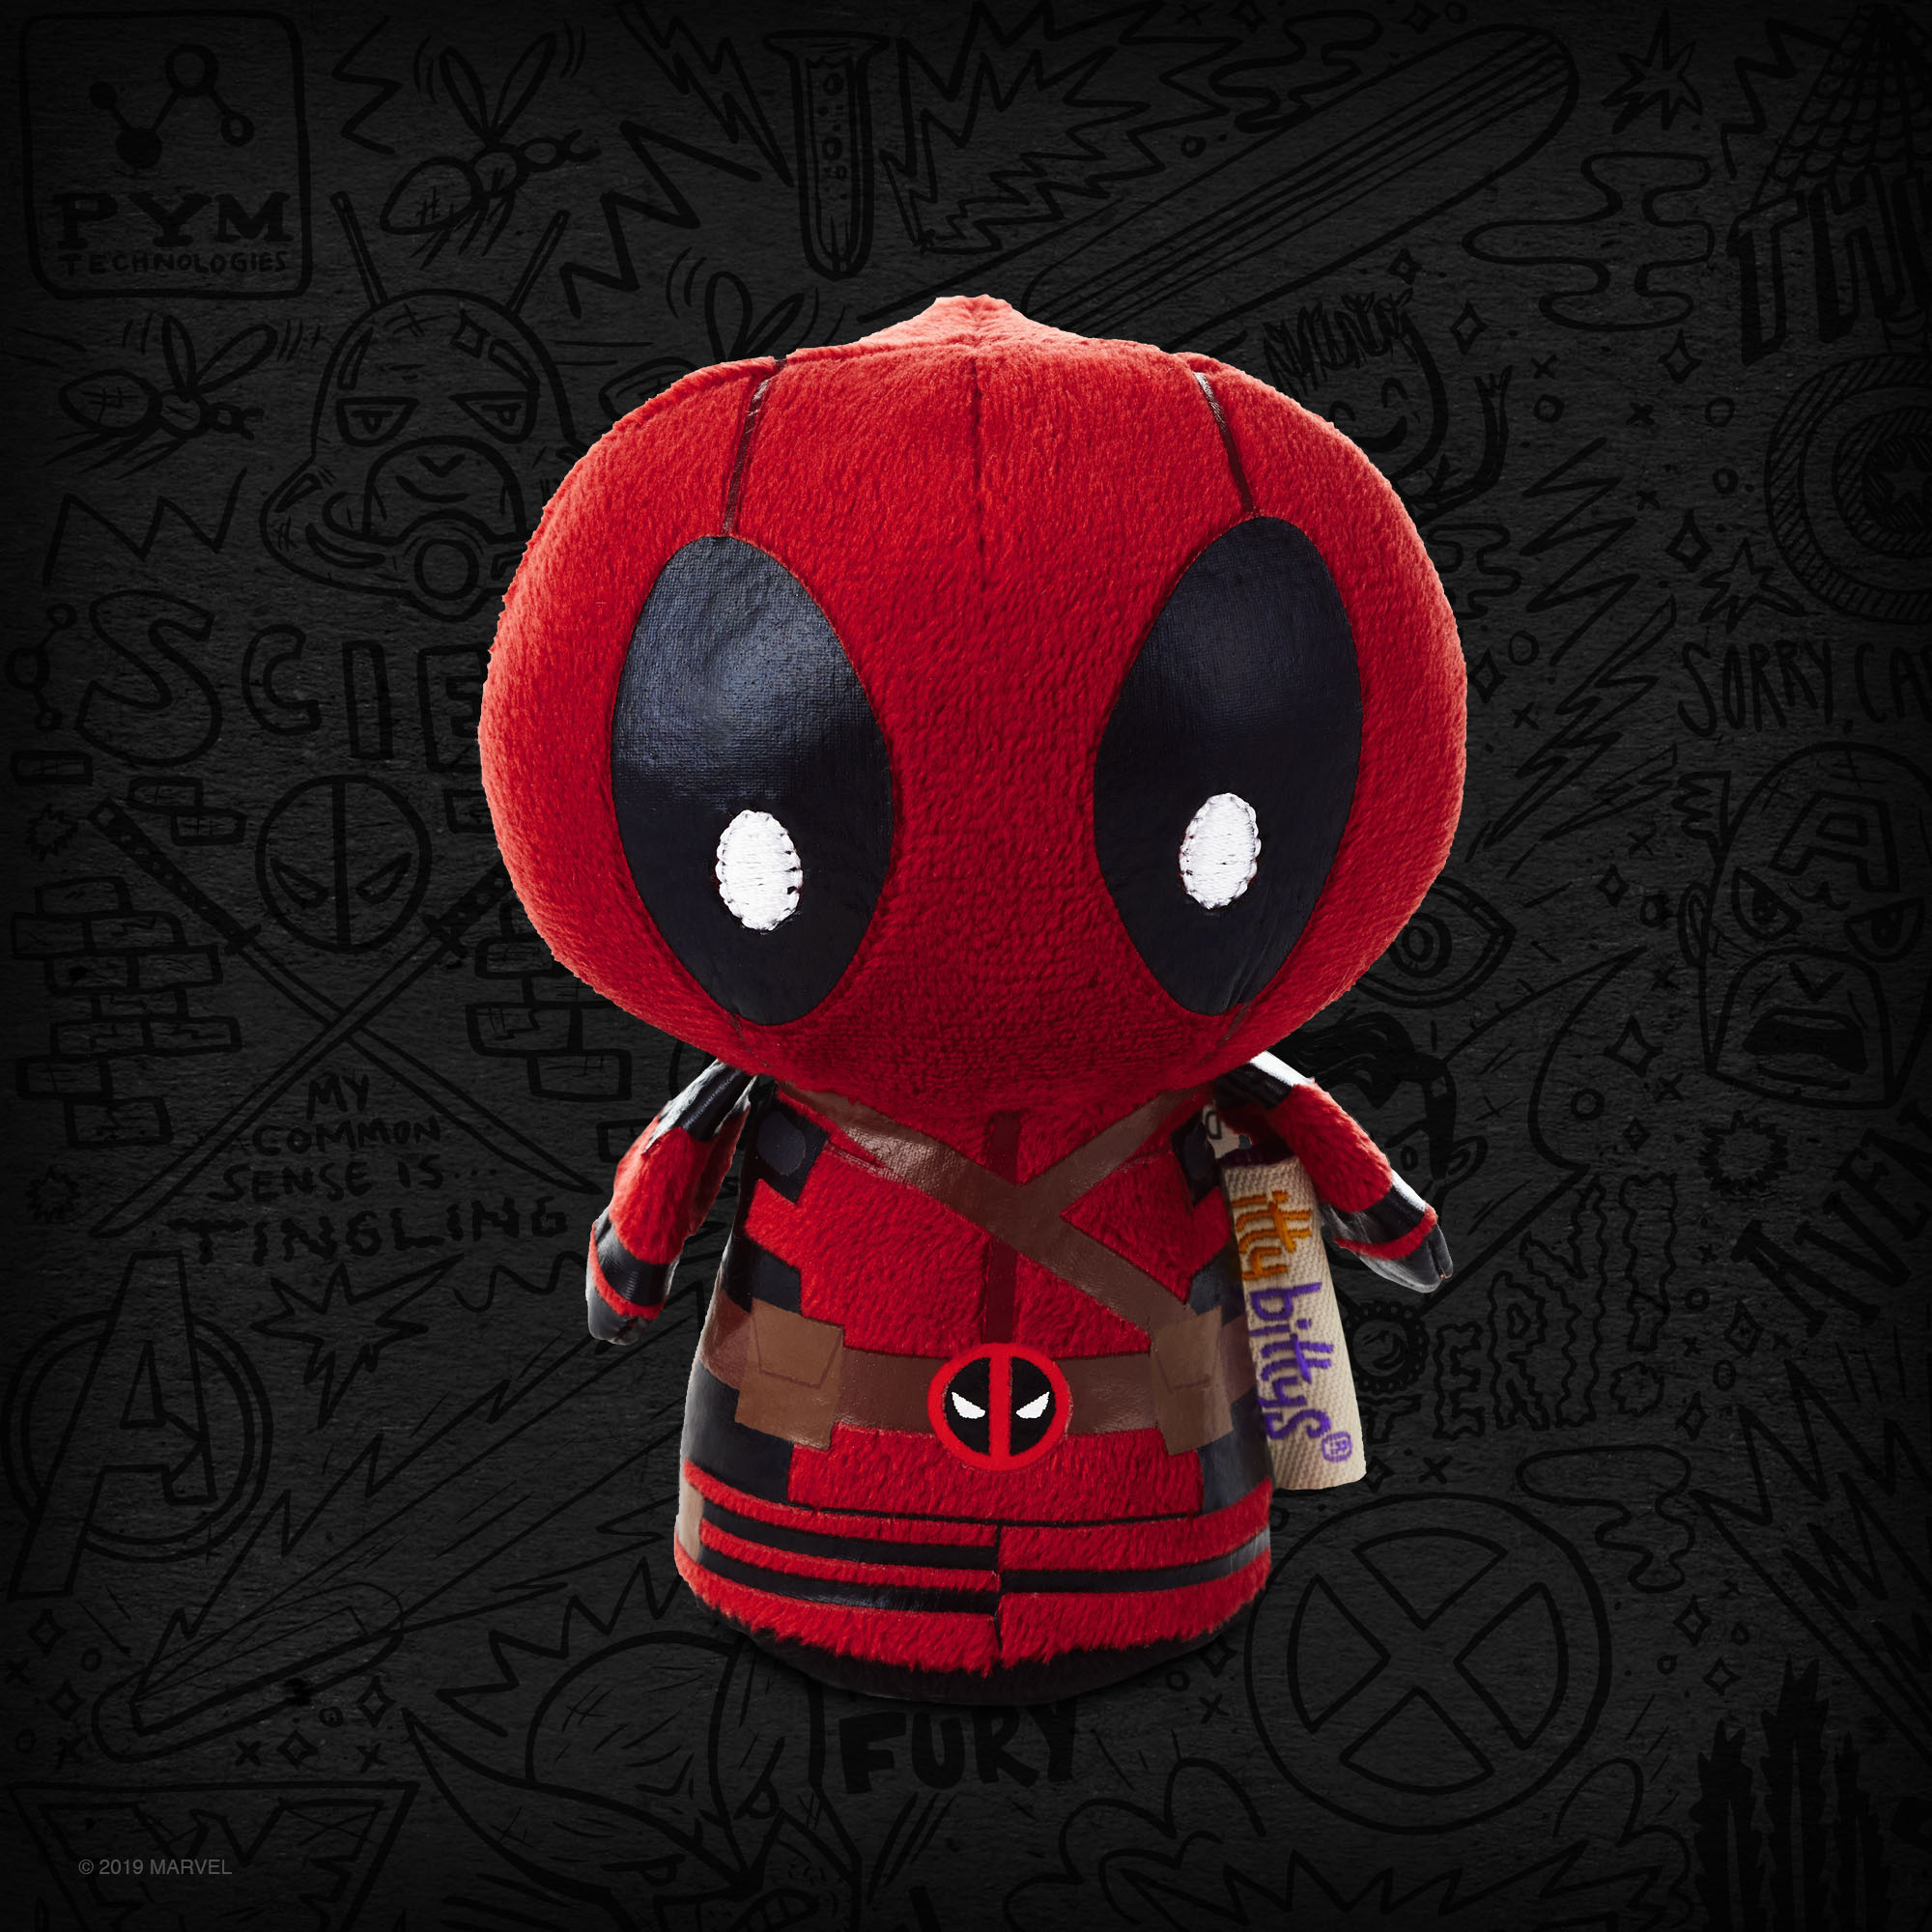 PopMinded by Hallmark To Offer Exclusives at ComicConHome Virtual